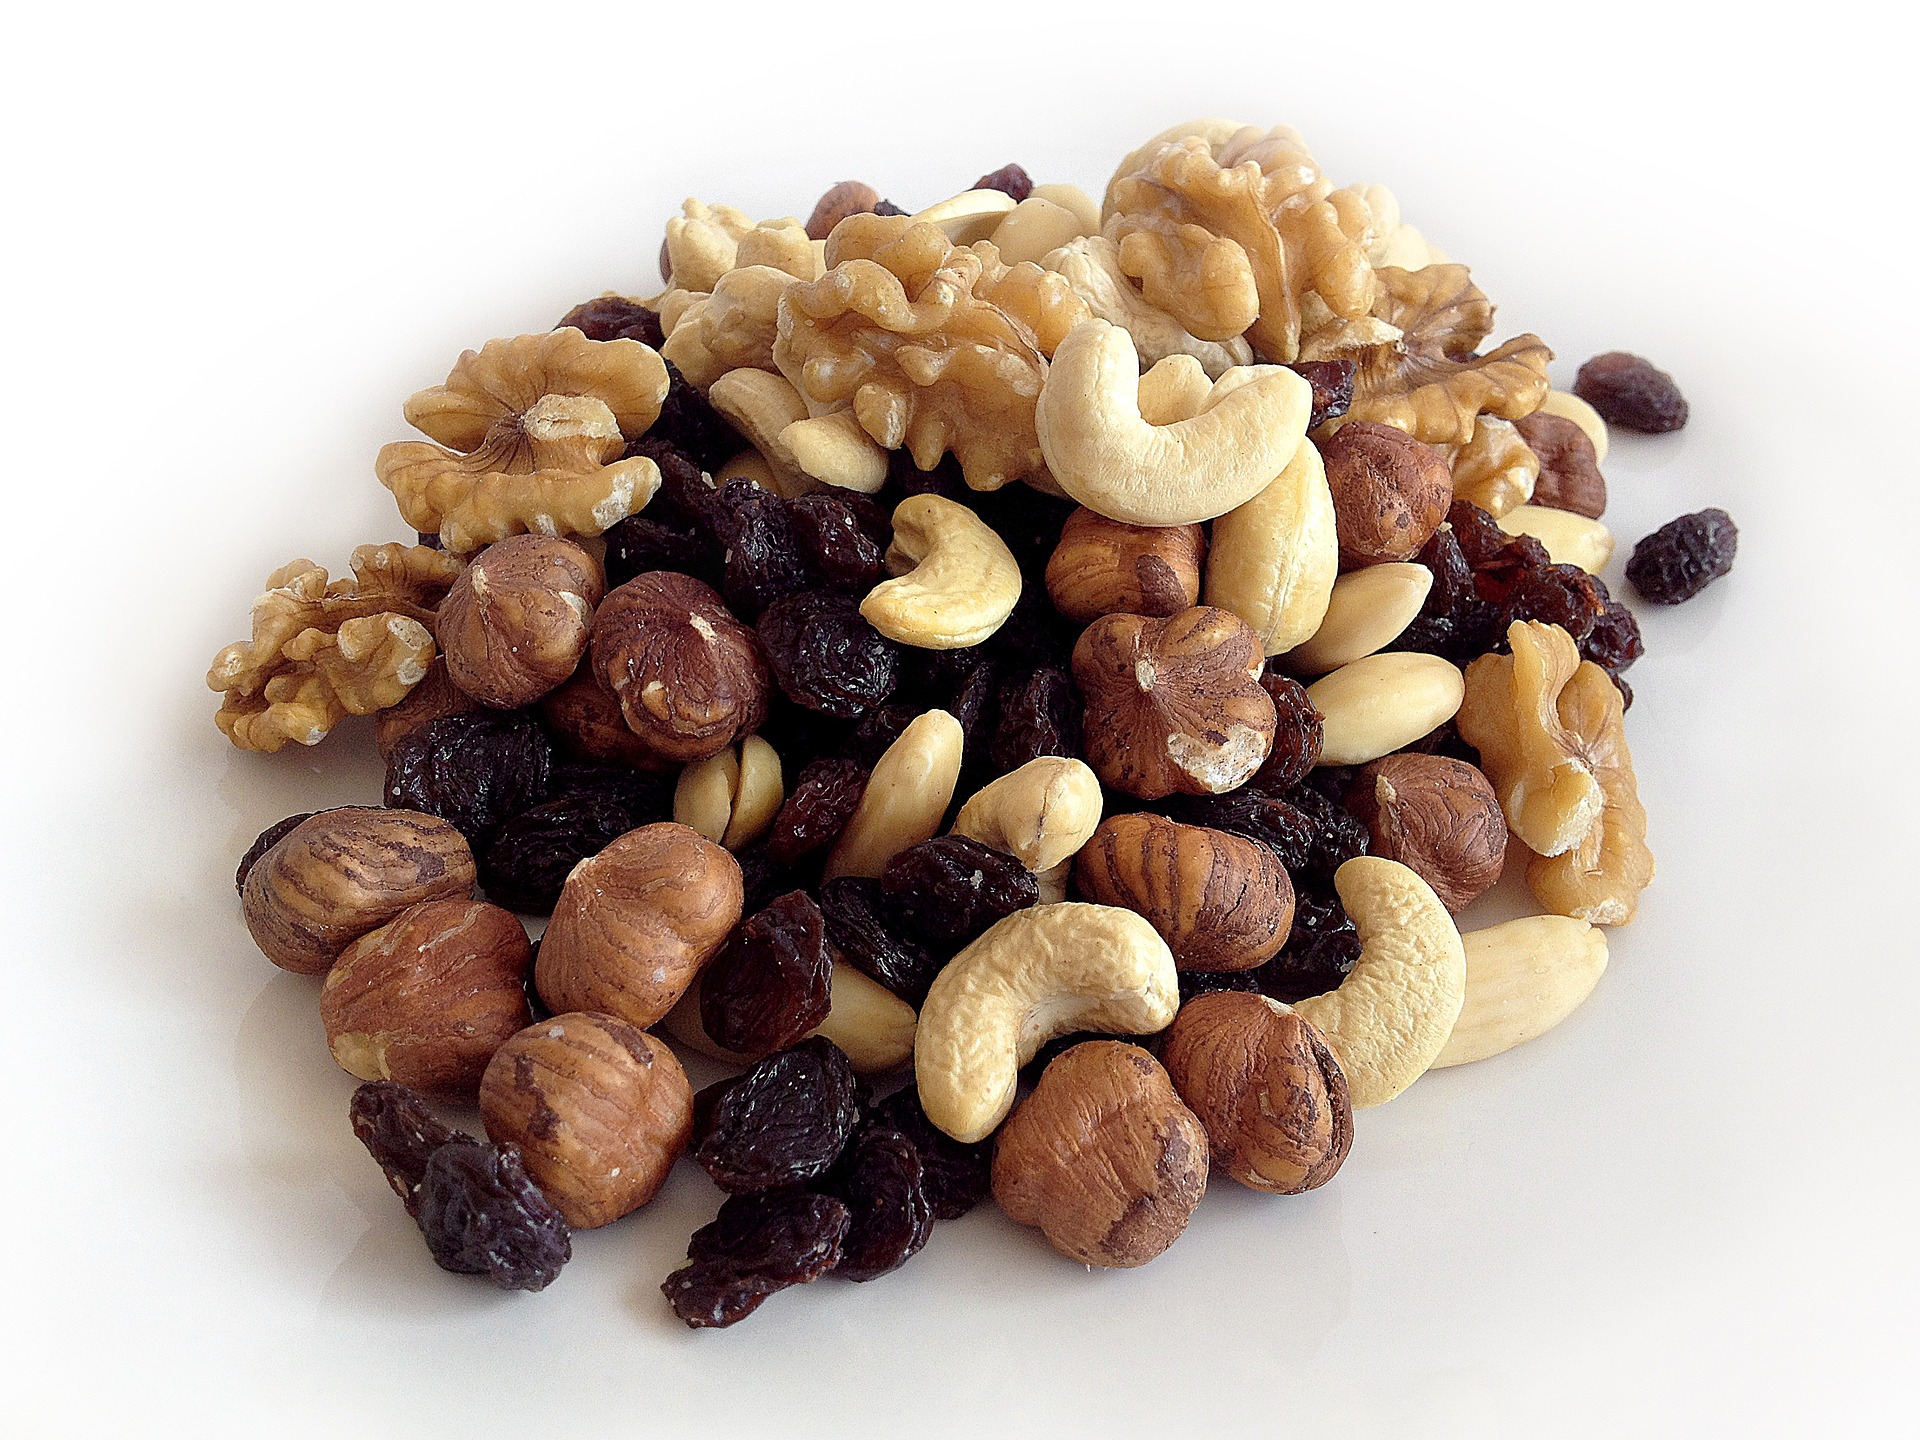 Study Suggests Nut Consumption May Lower Colon Cancer Risk